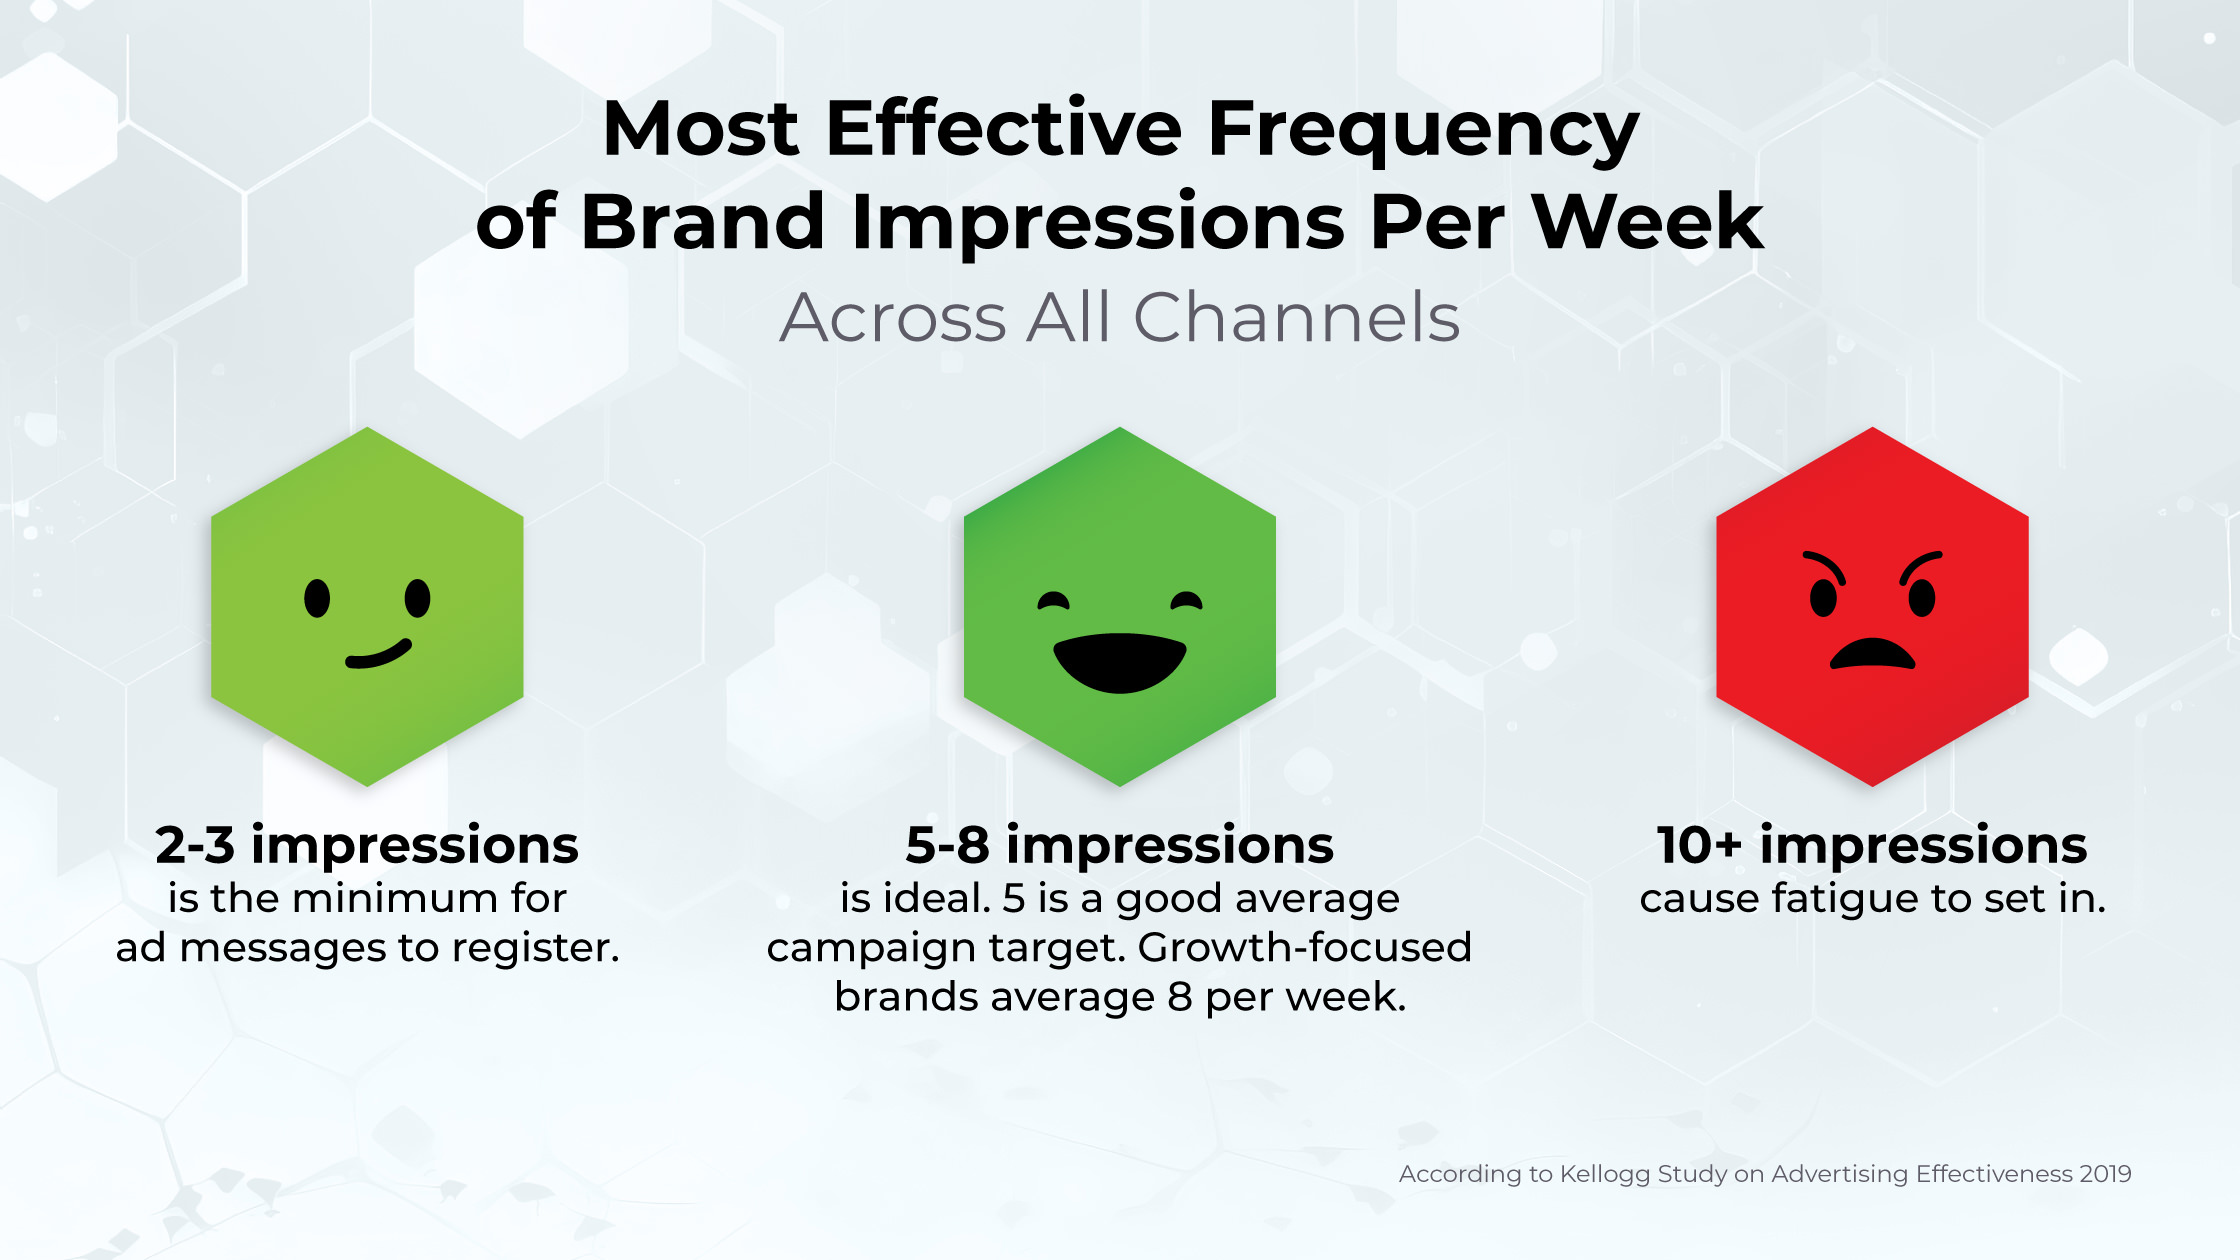 Most effective frequency of brand impressions per week across all channels